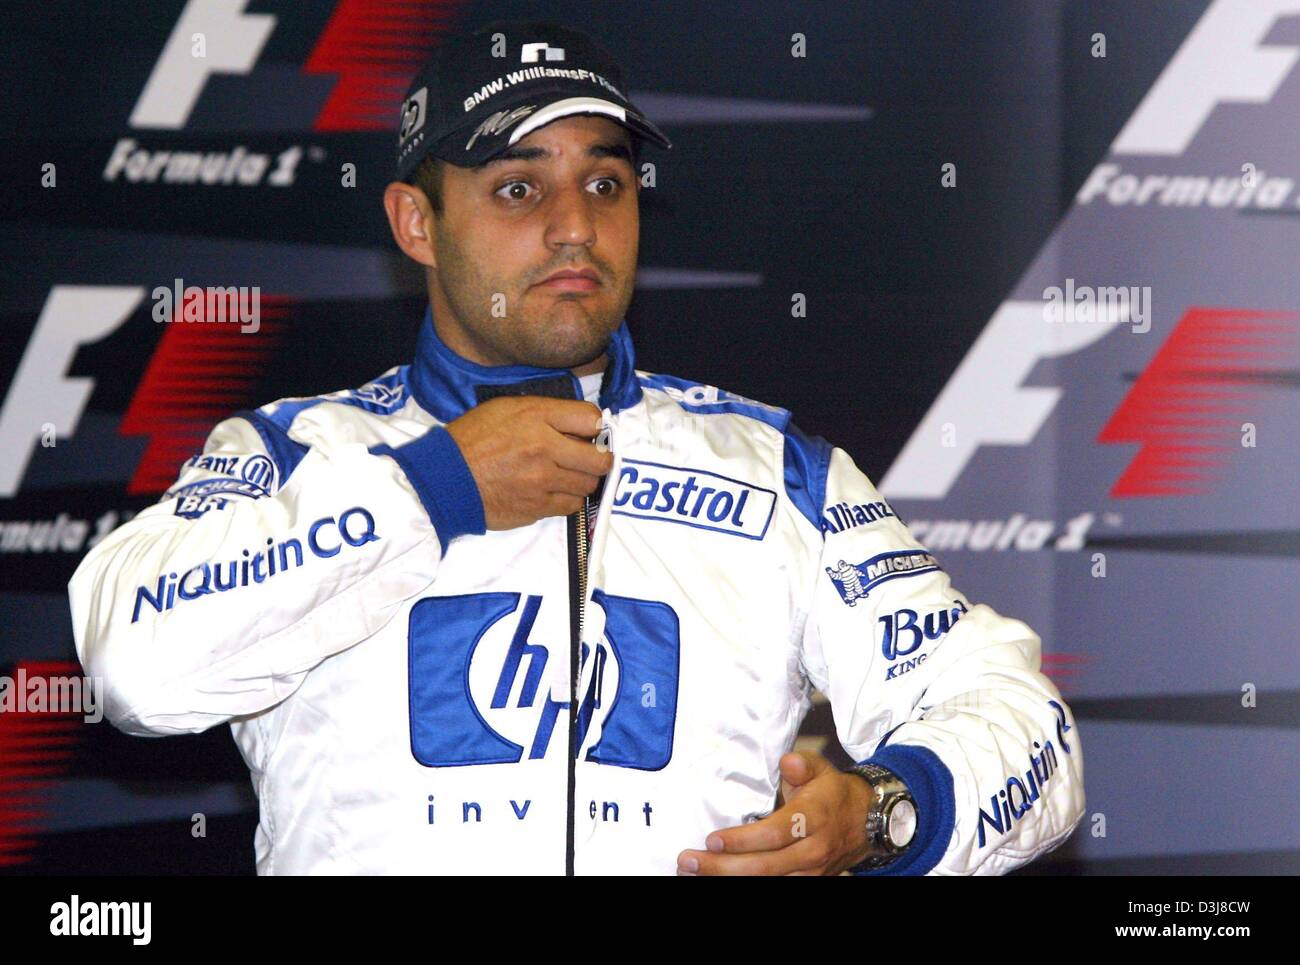 (dpa) - Colombian formula one pilot Juan Pablo Montoya of BMW Williams closes the zipper of his race suit on the Circuit de Catalunya near Barcelona, Spain, 8 May 2004. The Formula 1 Grand Prix of Spain will take place on 9 May 2004. Stock Photo